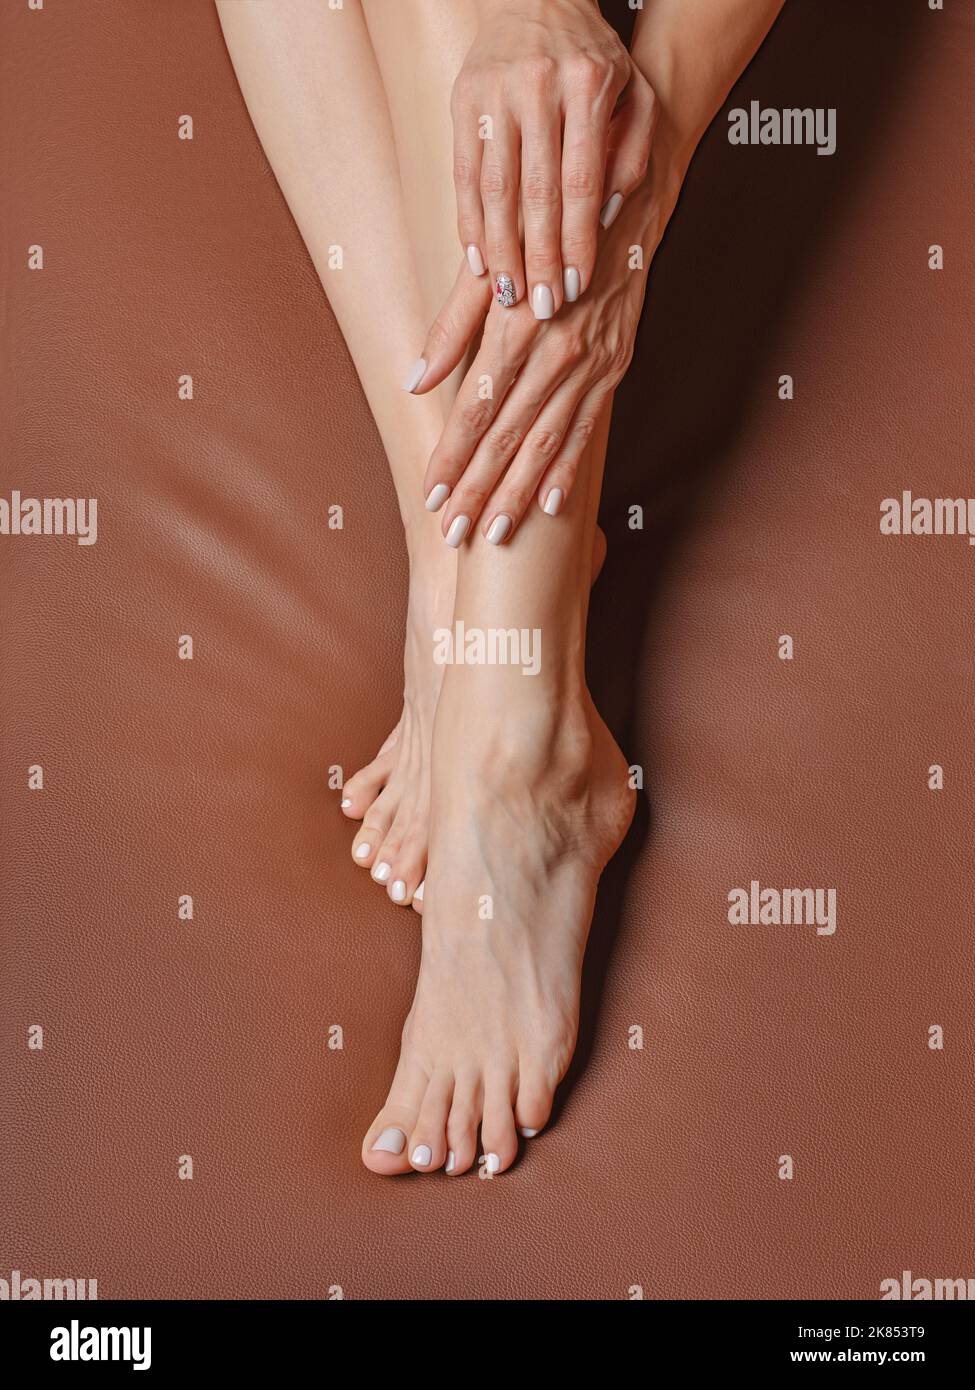 Overhead view of beautiful feet of middle age woman. Concept of taking care for the skin of the feet. Stock Photo